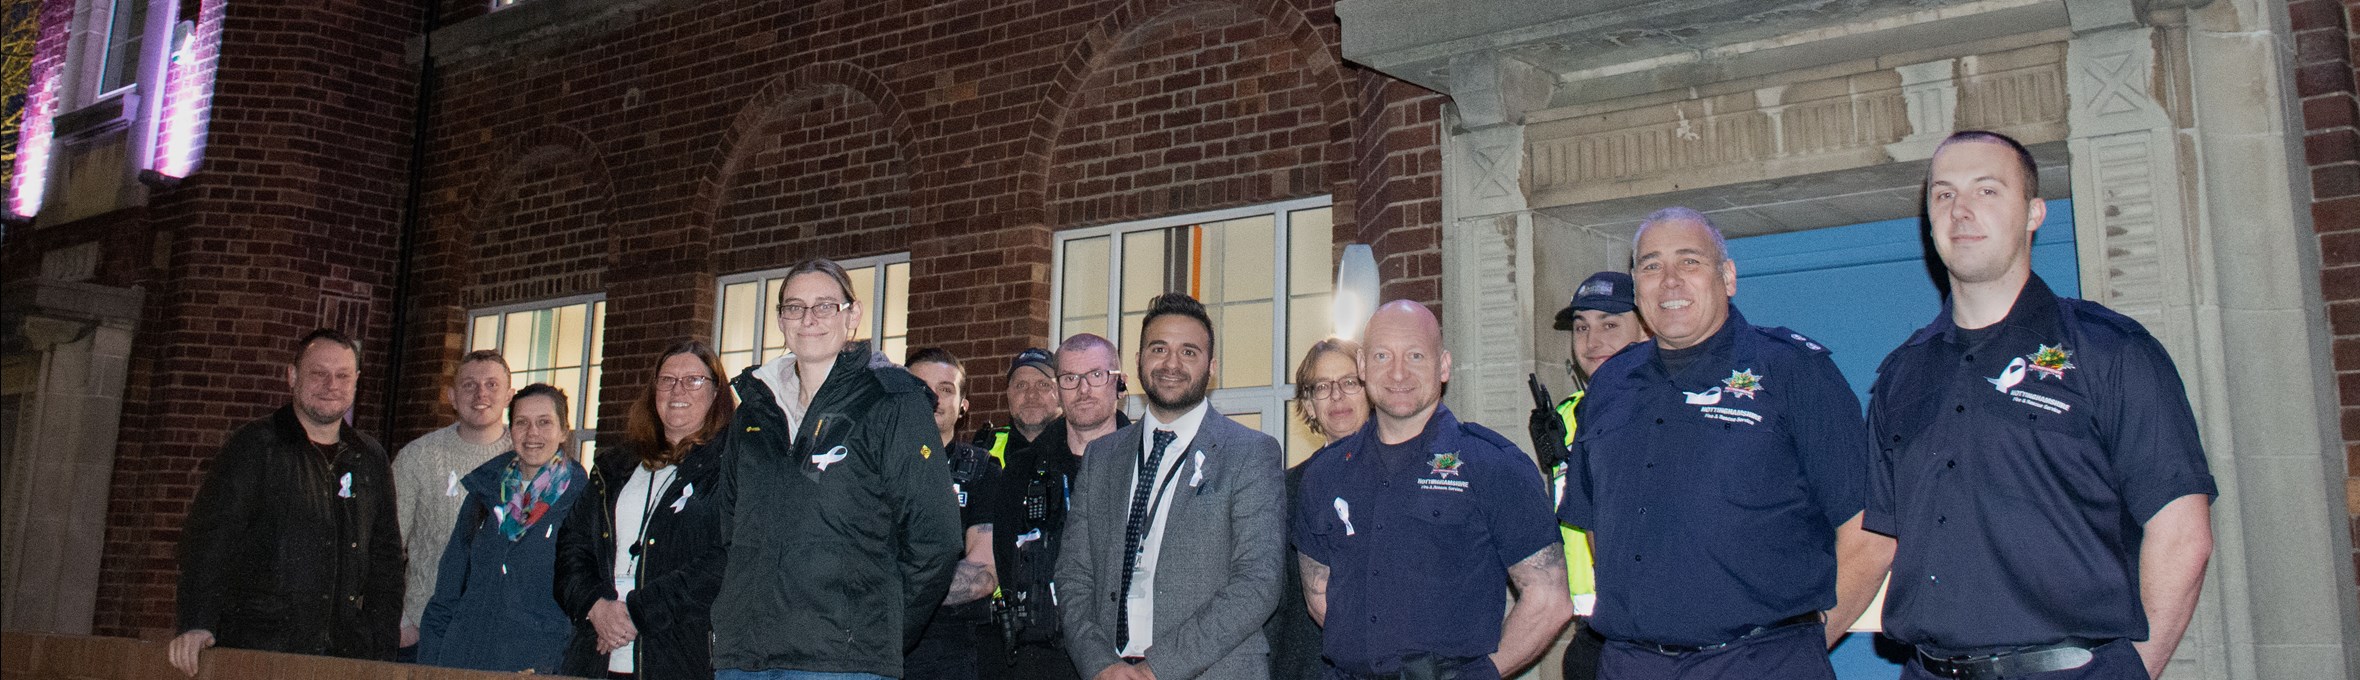 Council officers, Fire officers outside Ada Lovelace House 